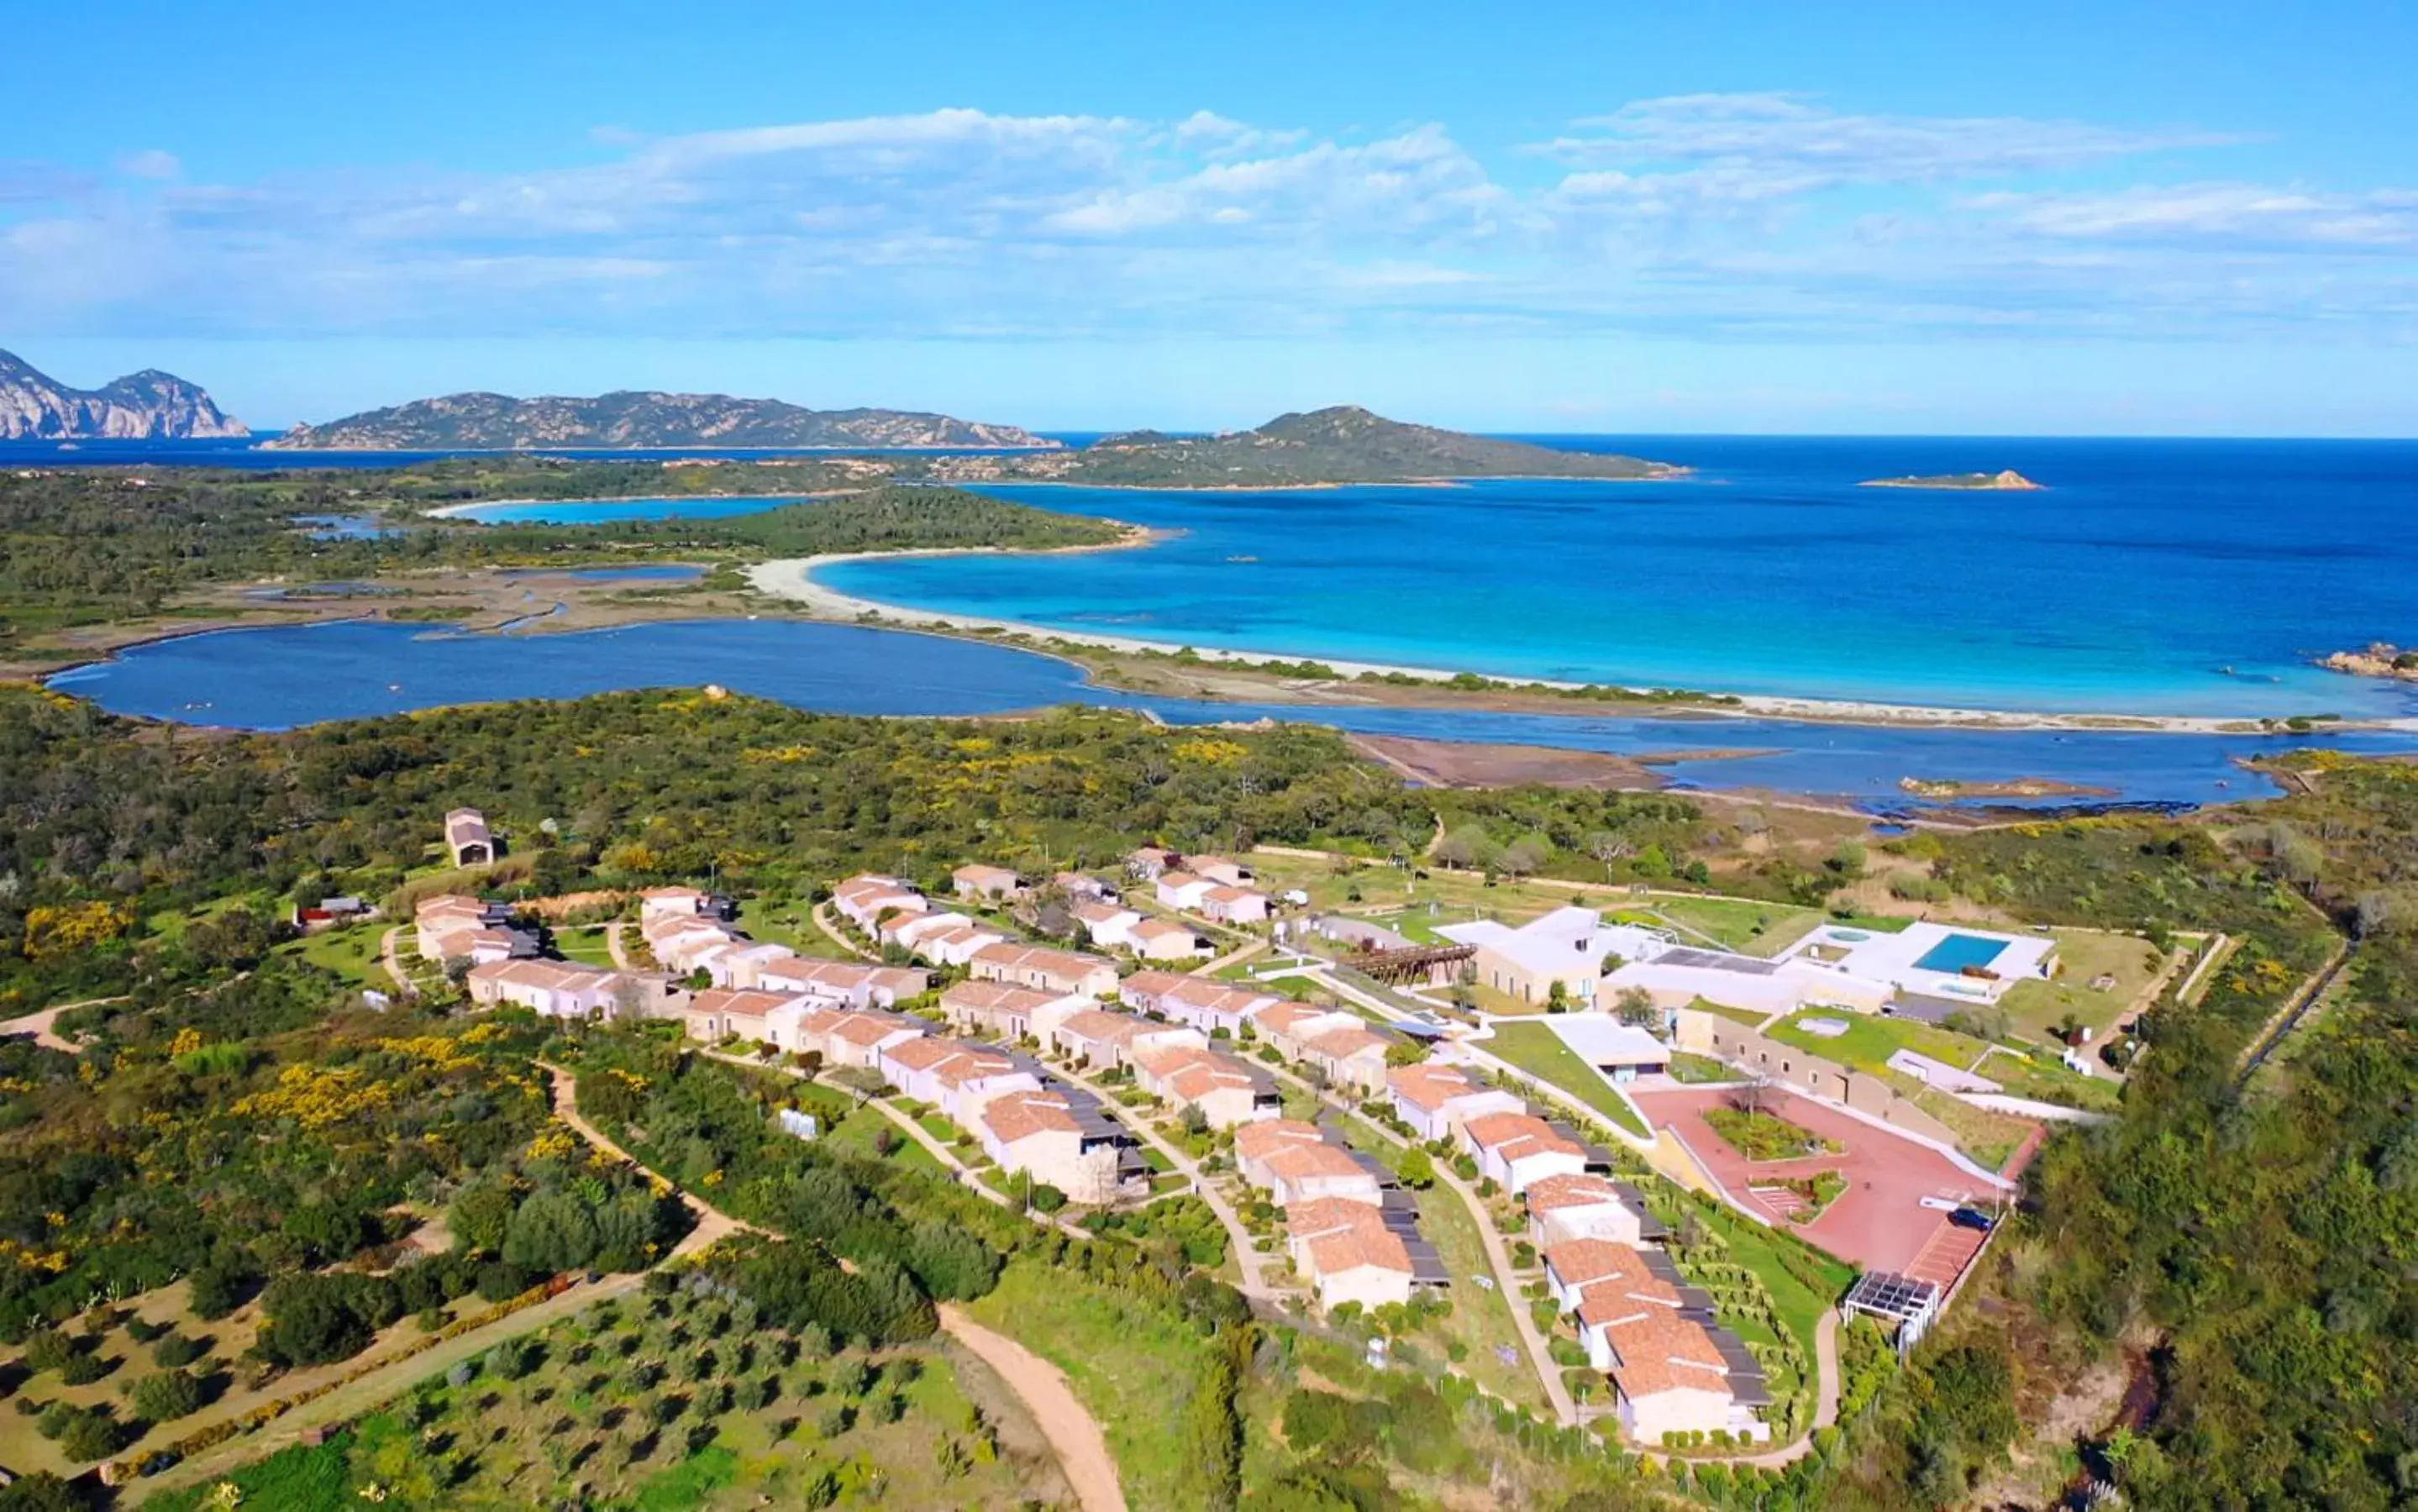 Bird's eye view in Baglioni Resort Sardinia - The Leading Hotels of the World